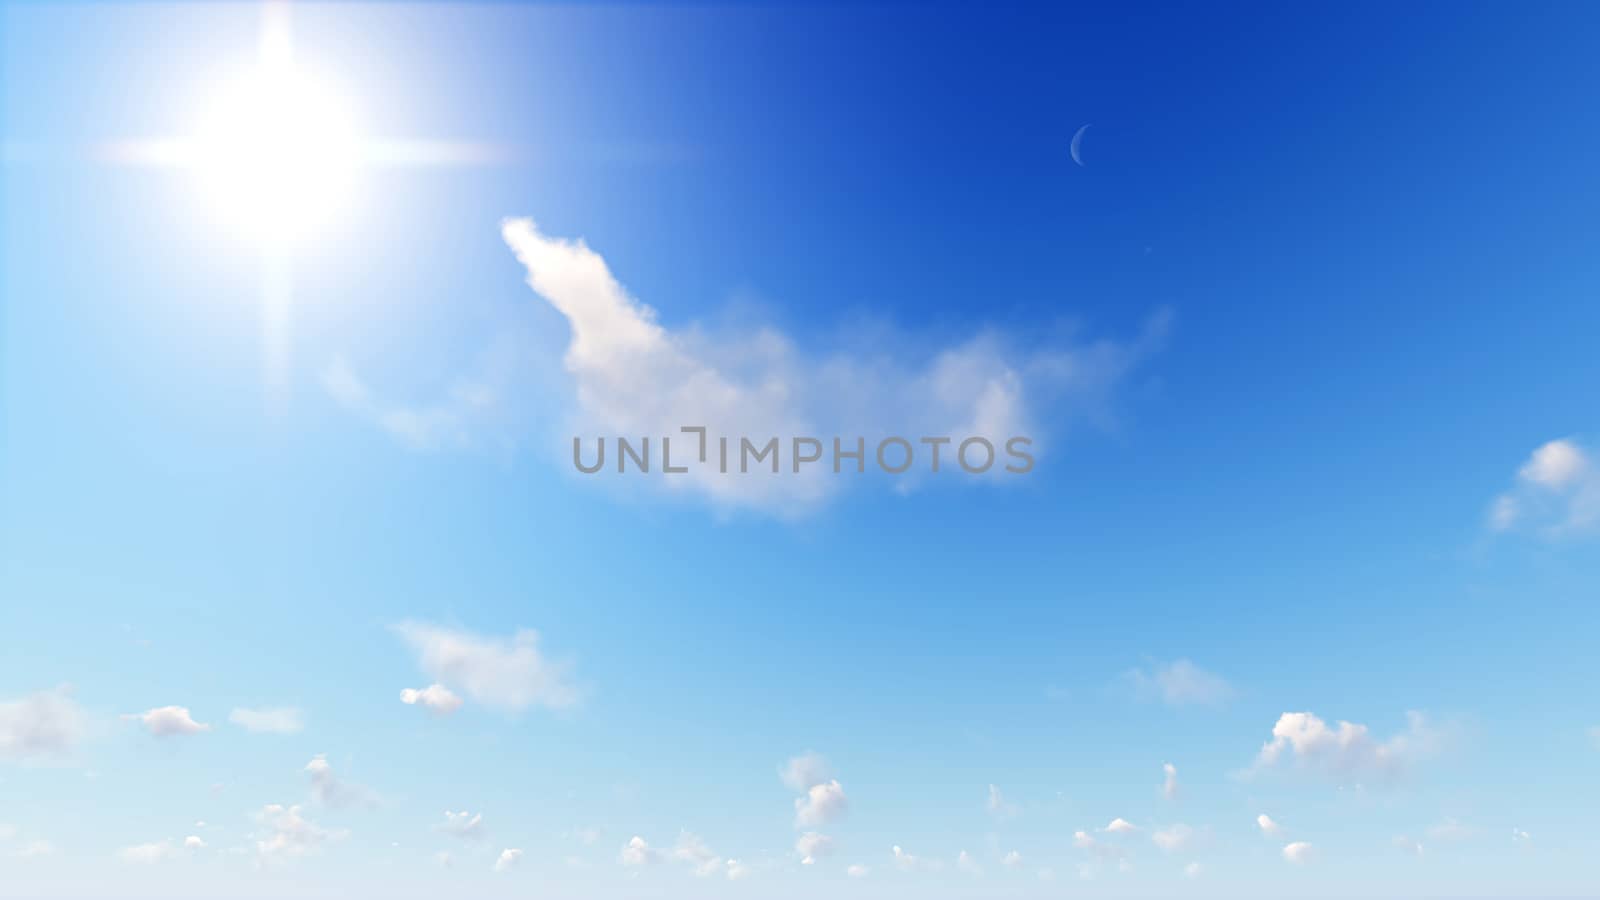 Cloudy blue sky abstract background, blue sky background with ti by teerawit